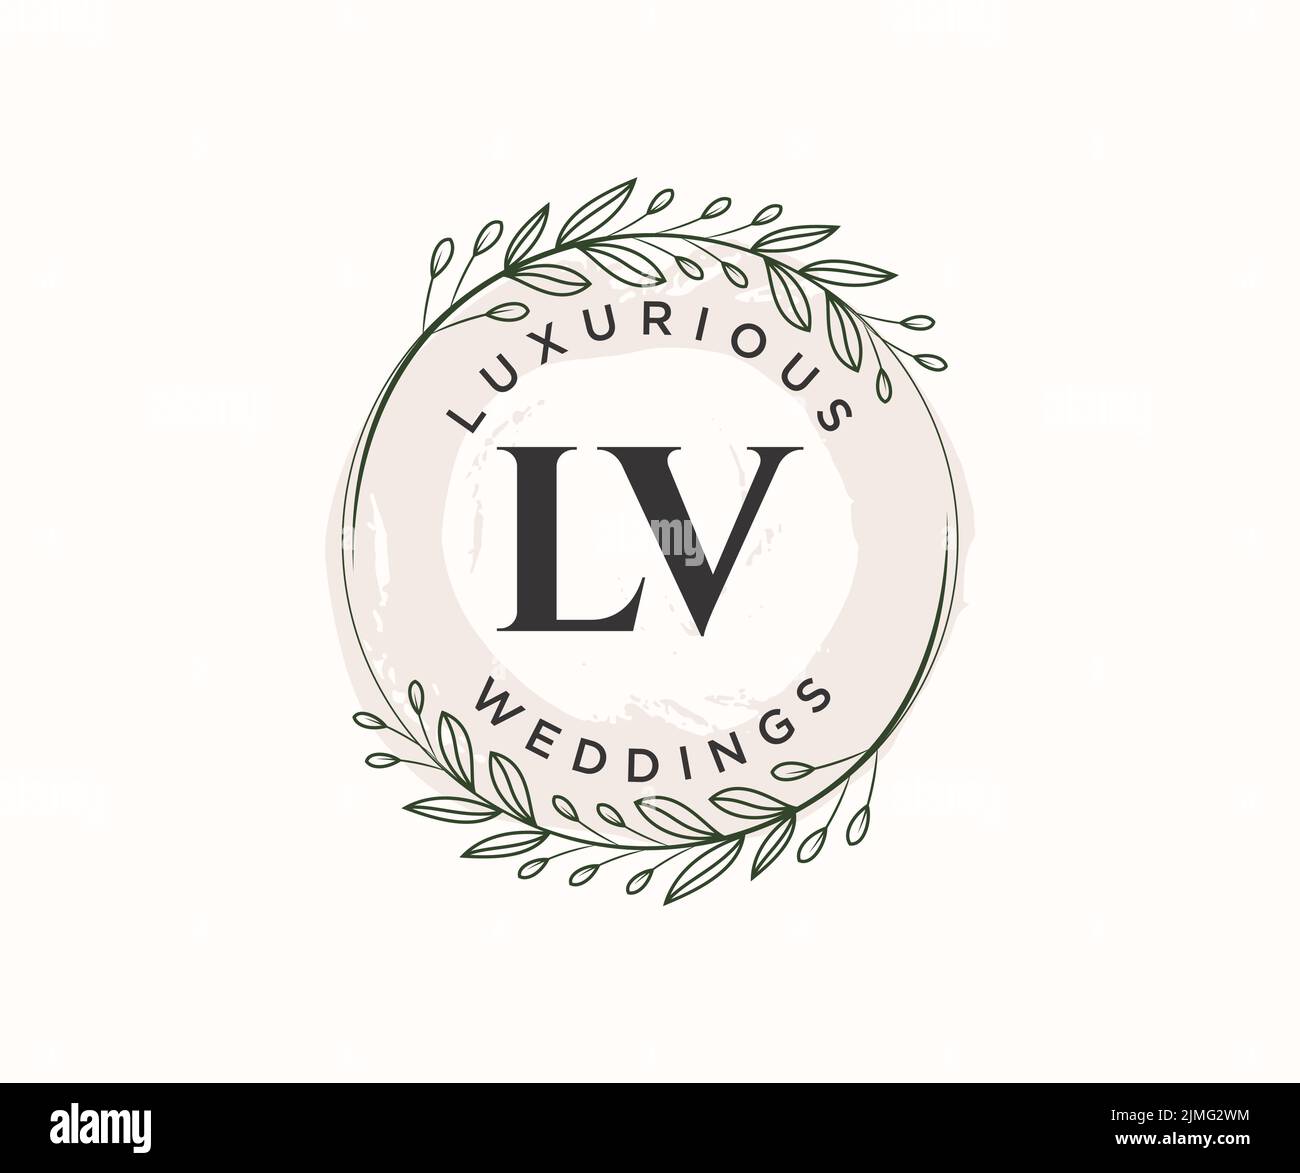 Vl logo Cut Out Stock Images & Pictures - Alamy